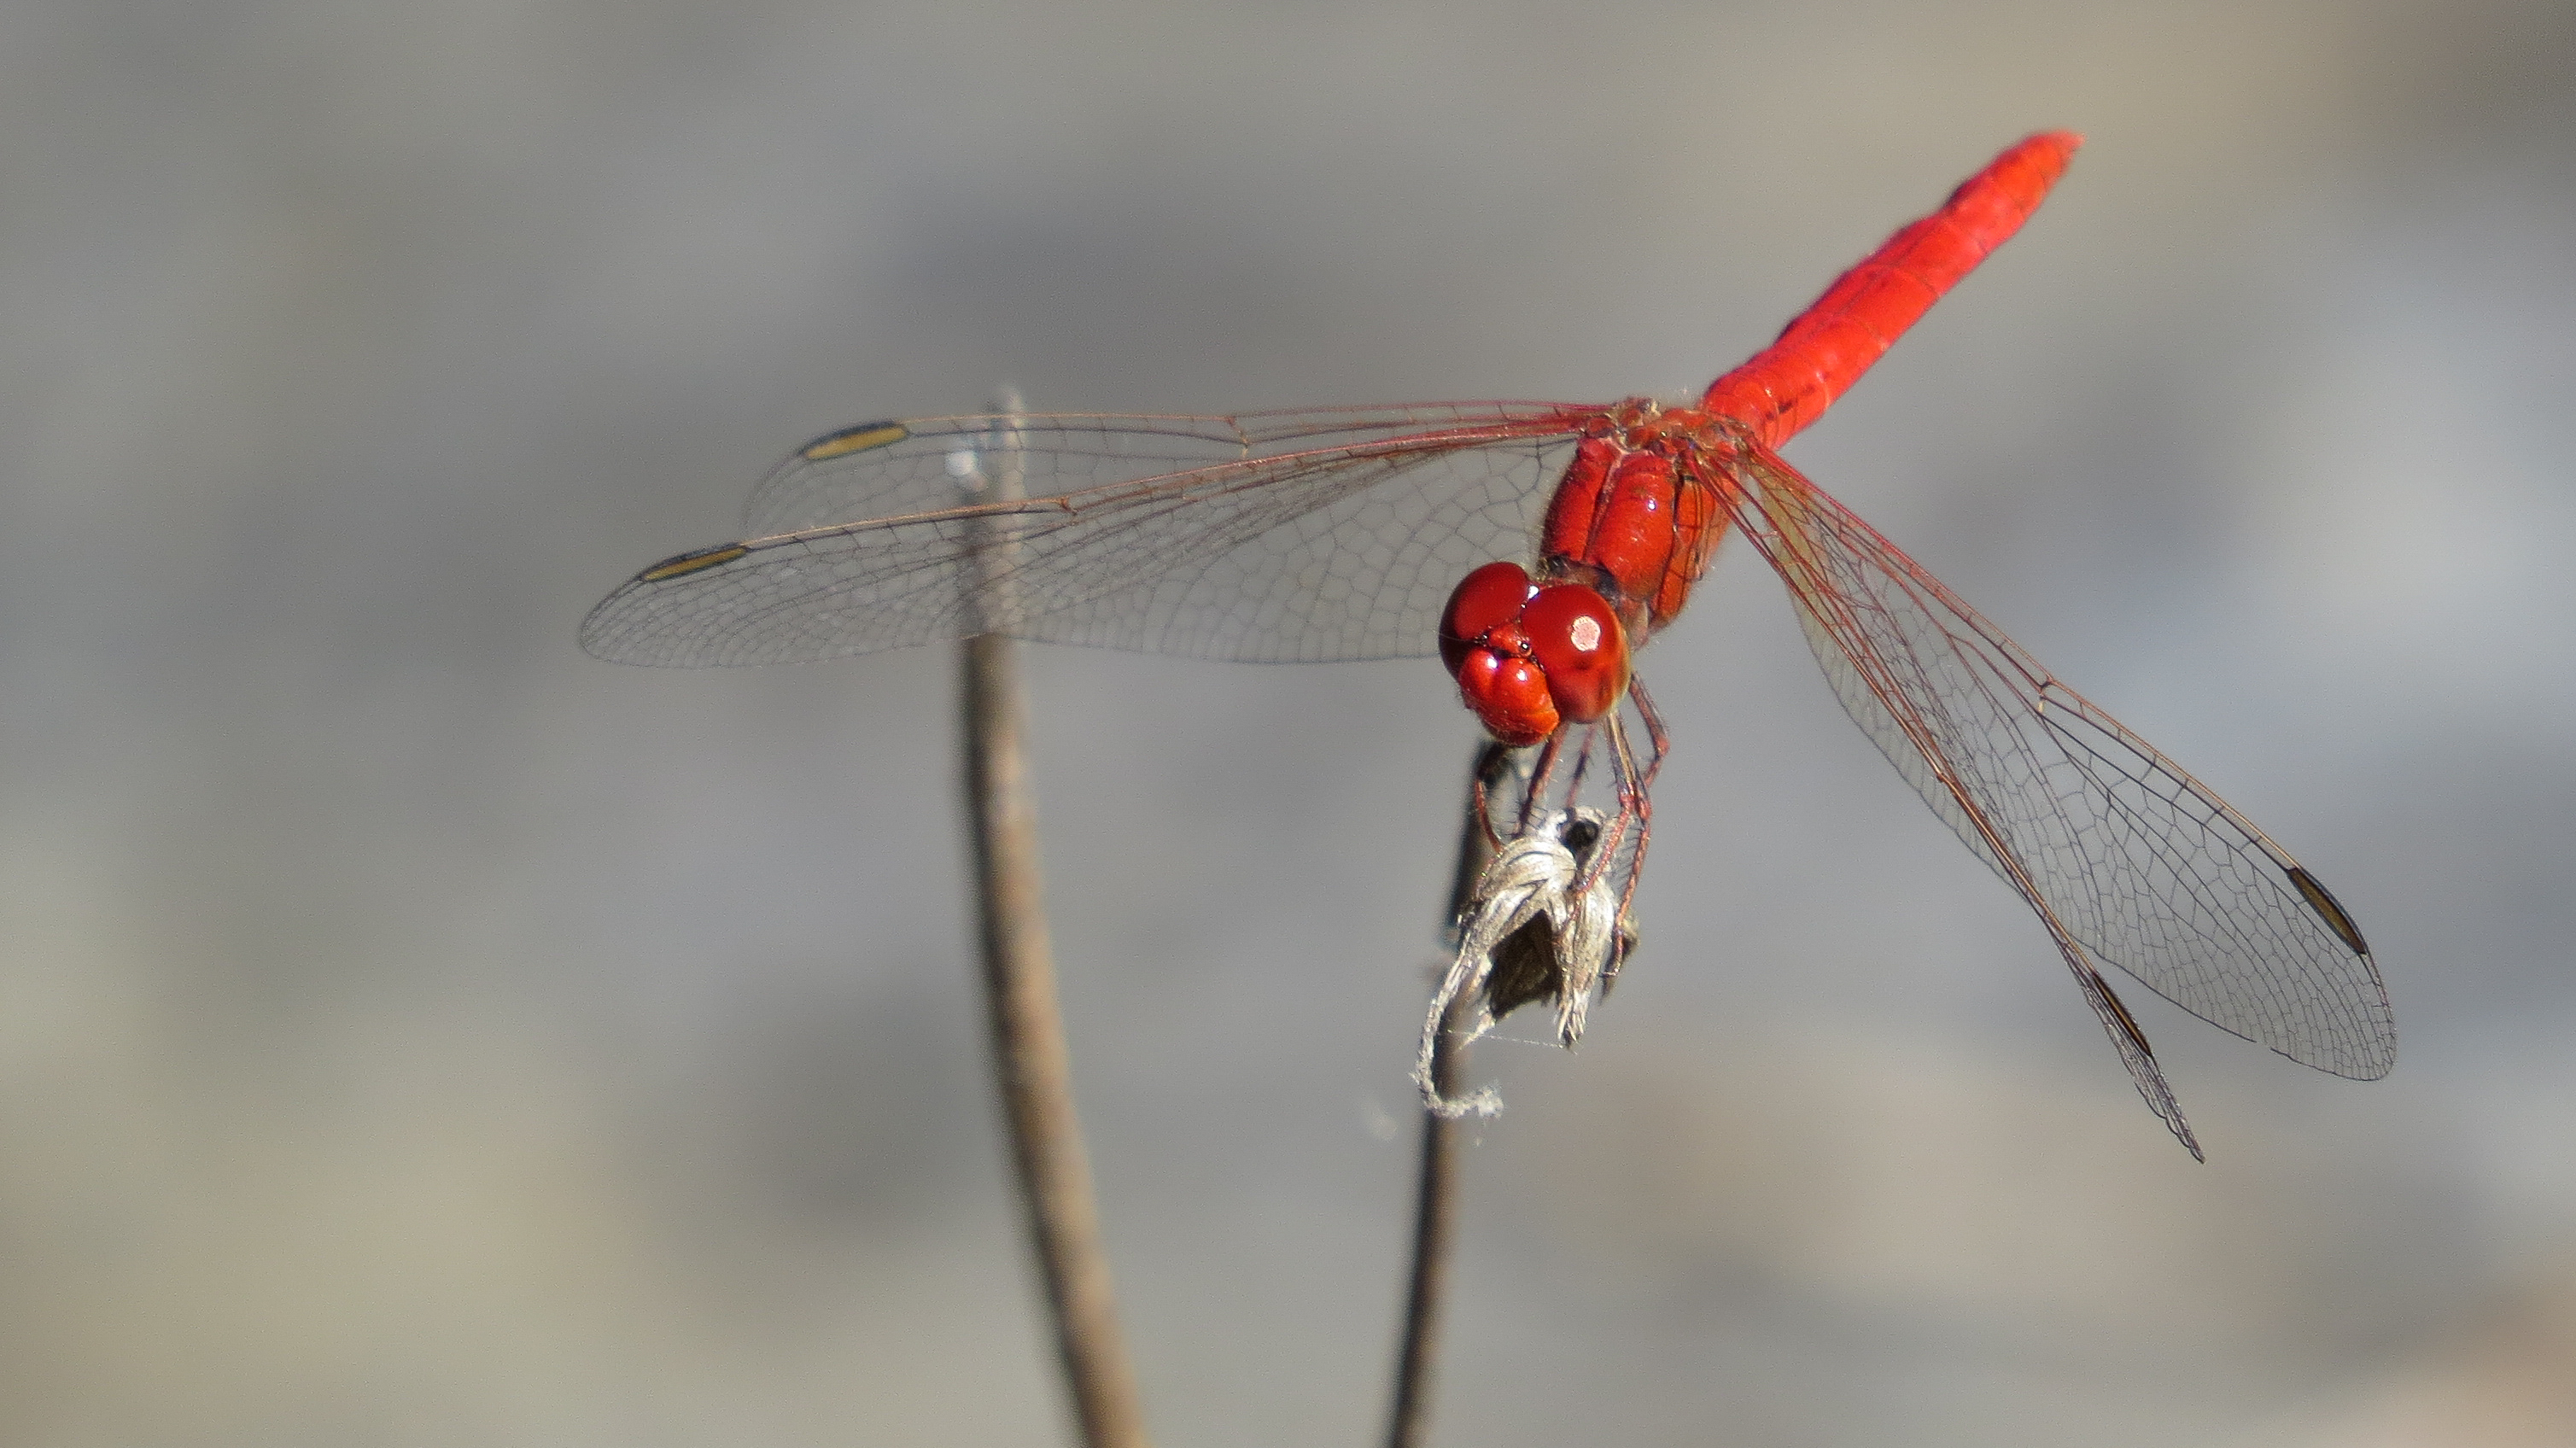 File:All-red dragonfly (15874489417).jpg - Wikimedia Commons